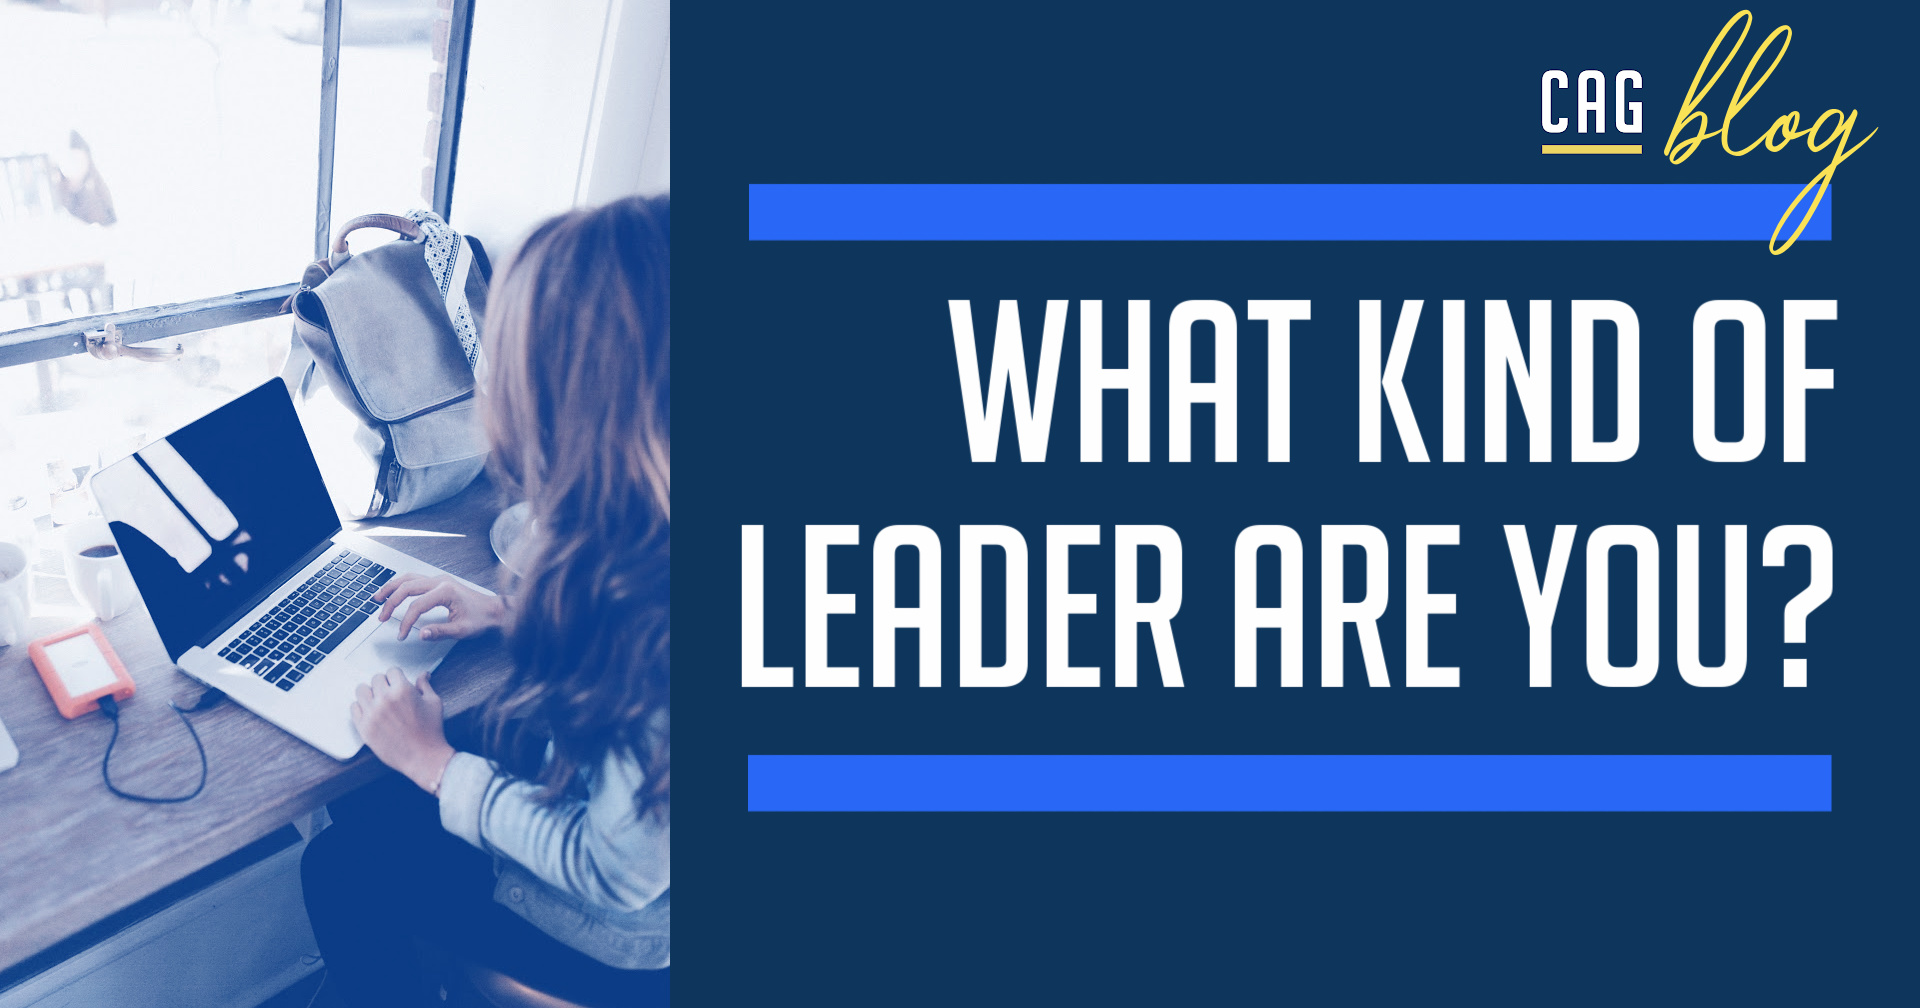 What kind of leader are you? CAG Strategies